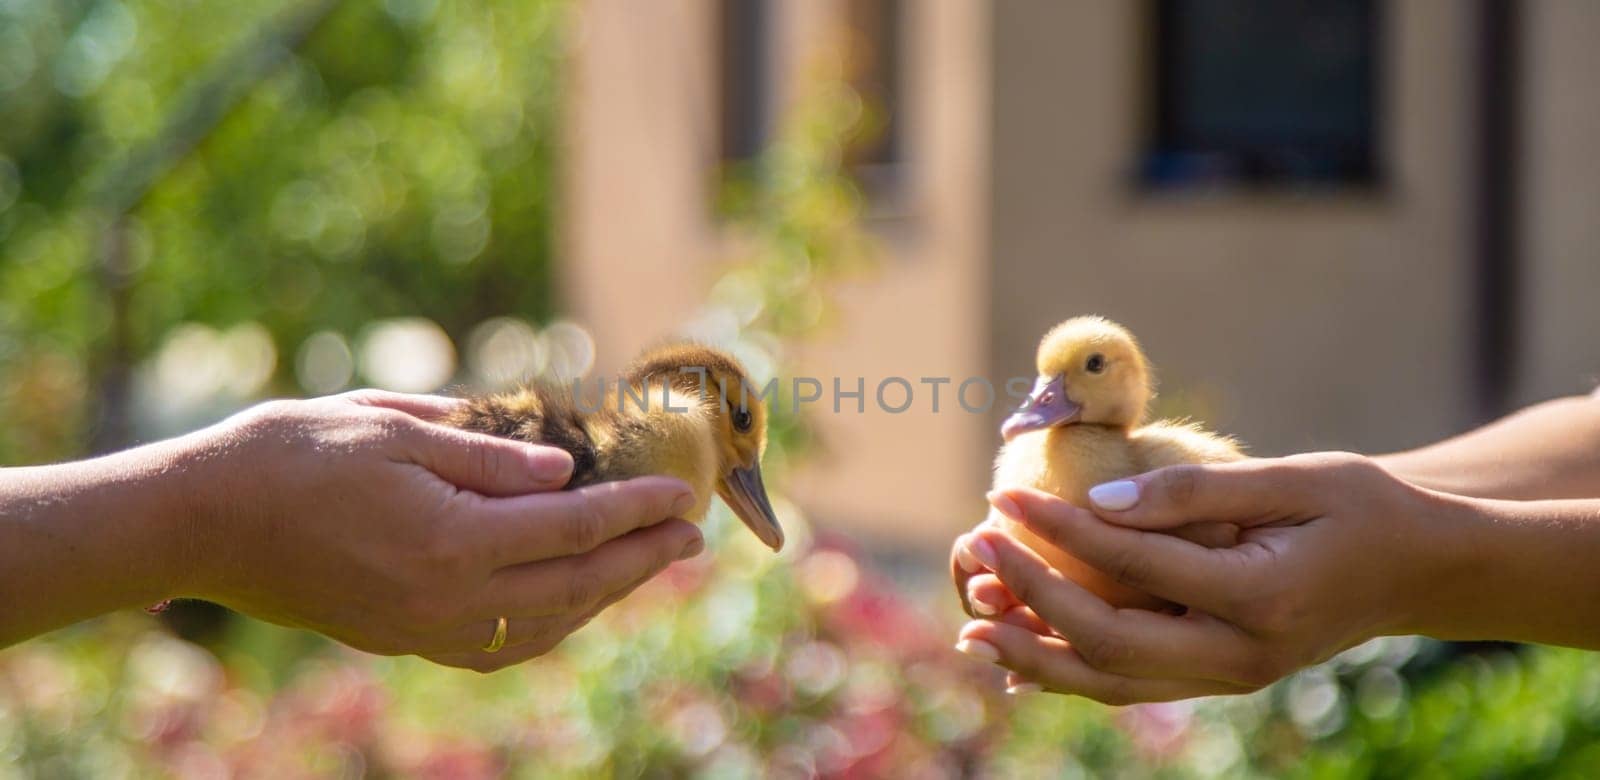 The farmers are holding two ducklings in their hands. Selective focus. nature